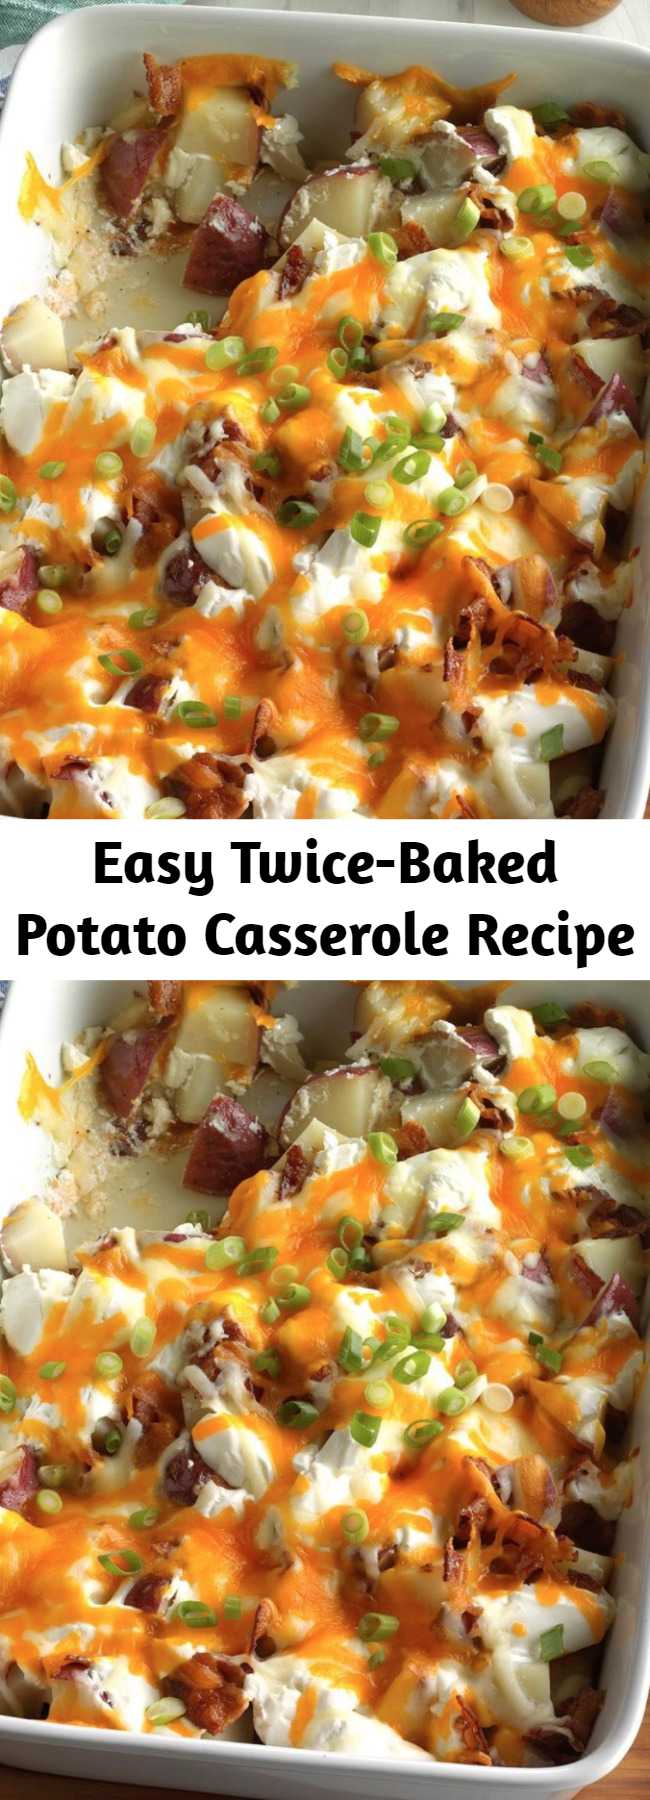 Easy Twice-Baked Potato Casserole Recipe - My daughter gave me this twice-baked potatoes recipe because she knows I love potatoes. The hearty casserole is loaded with a palate-pleasing combination of bacon, cheeses, green onions and sour cream.